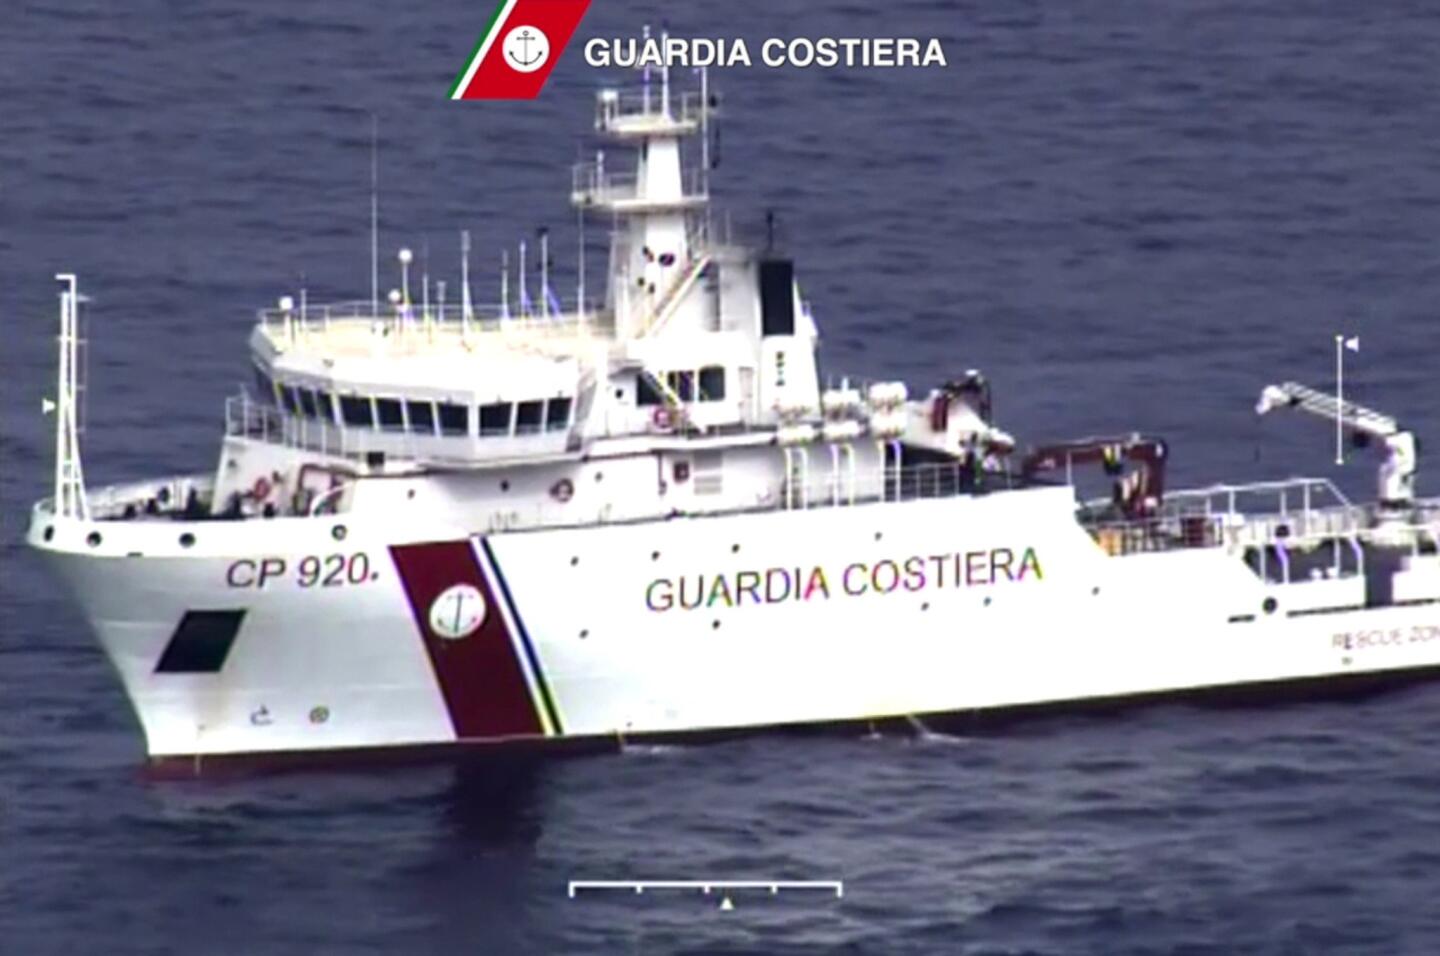 One of the ships involved in a rescue operation off the coast of Sicily is shown in a screen grab released by the Italian Coast Guard on April 19, 2015.